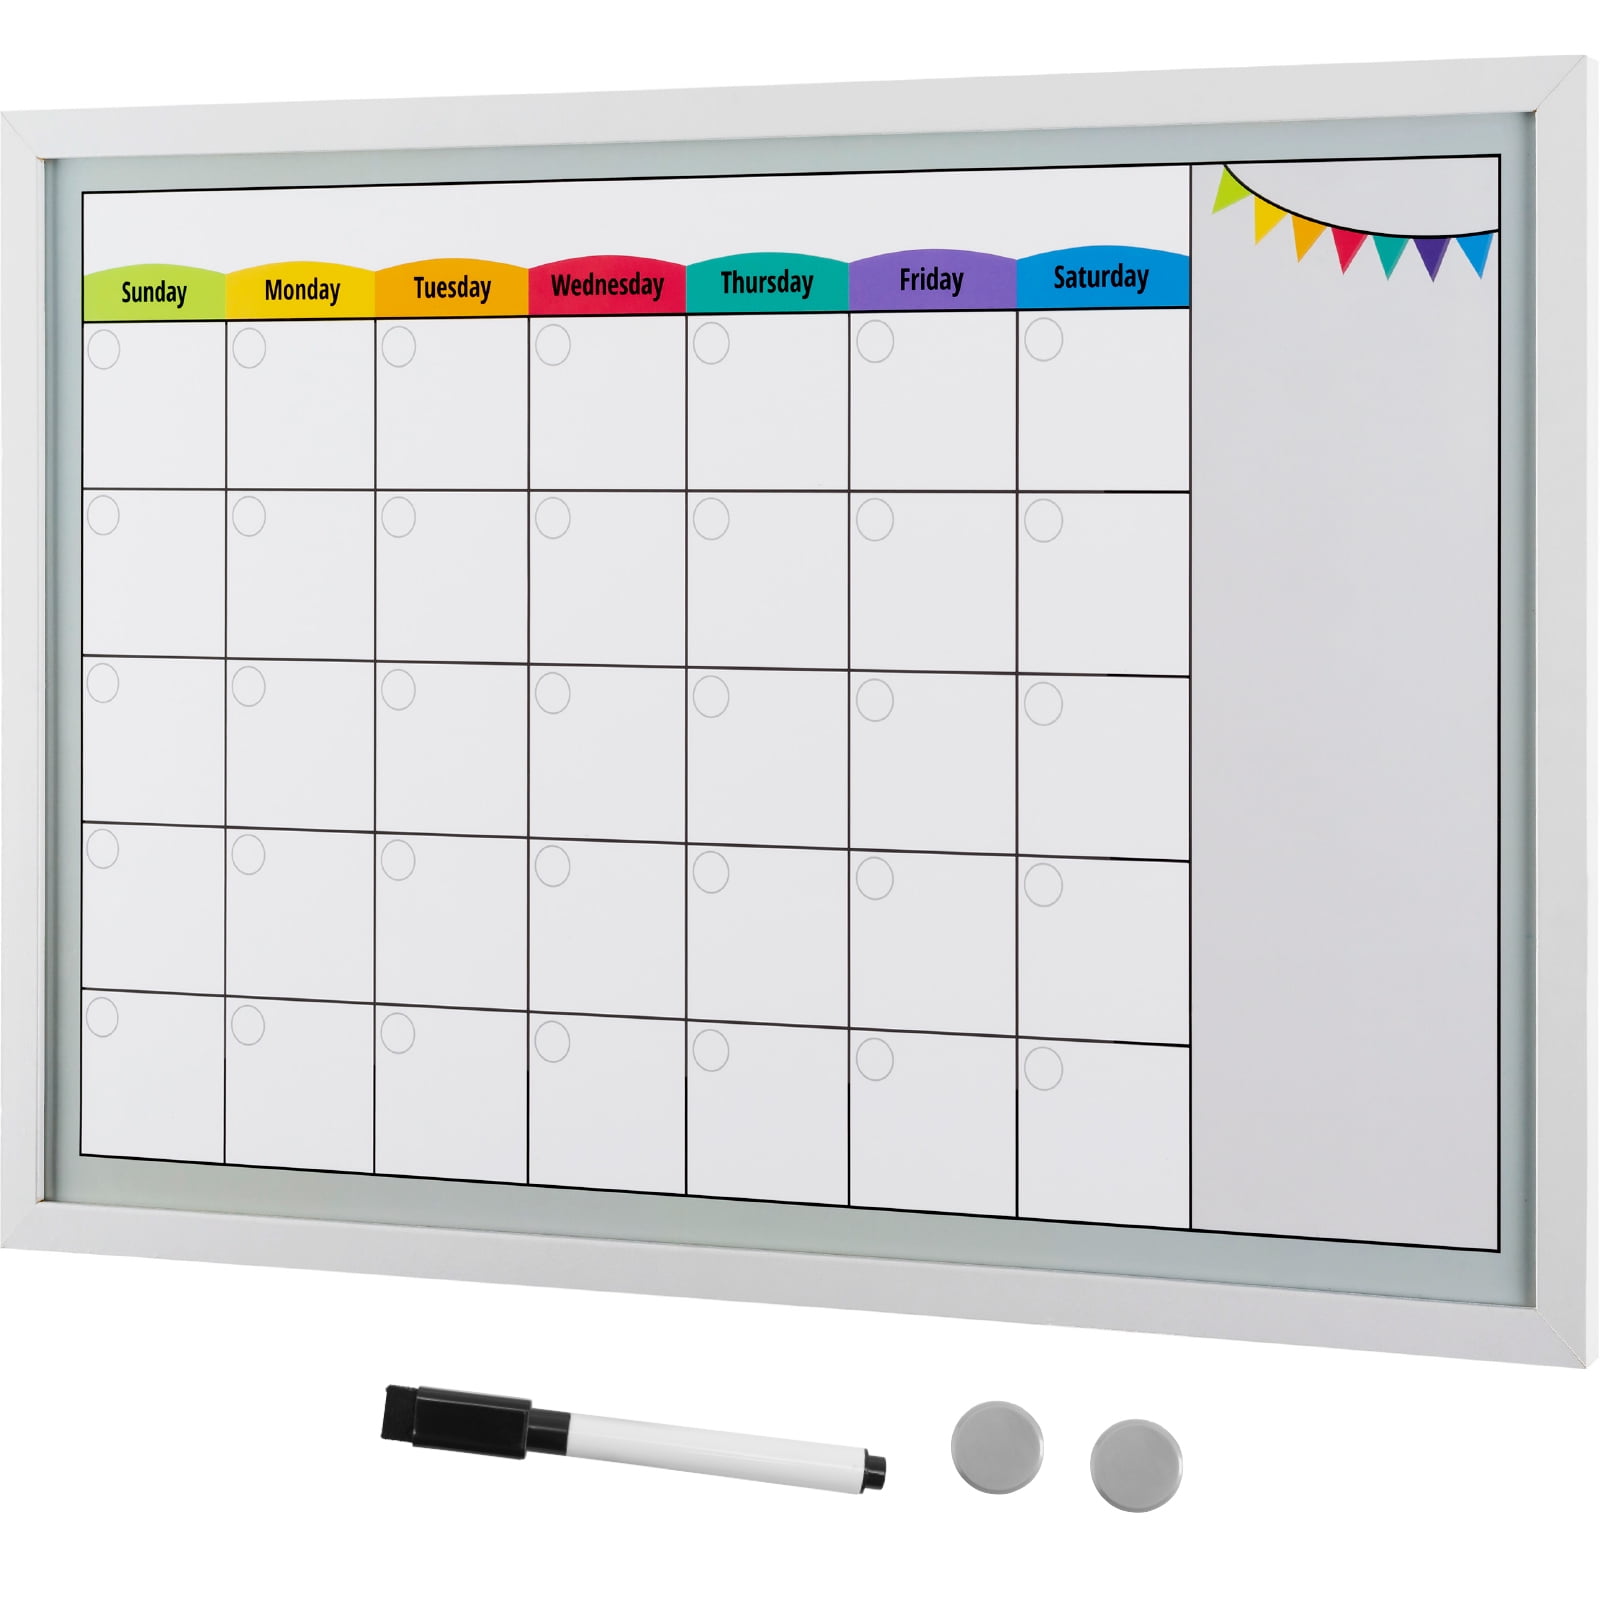 Excello Global Products Framed Magnetic Calendar Whiteboard 24x16 with